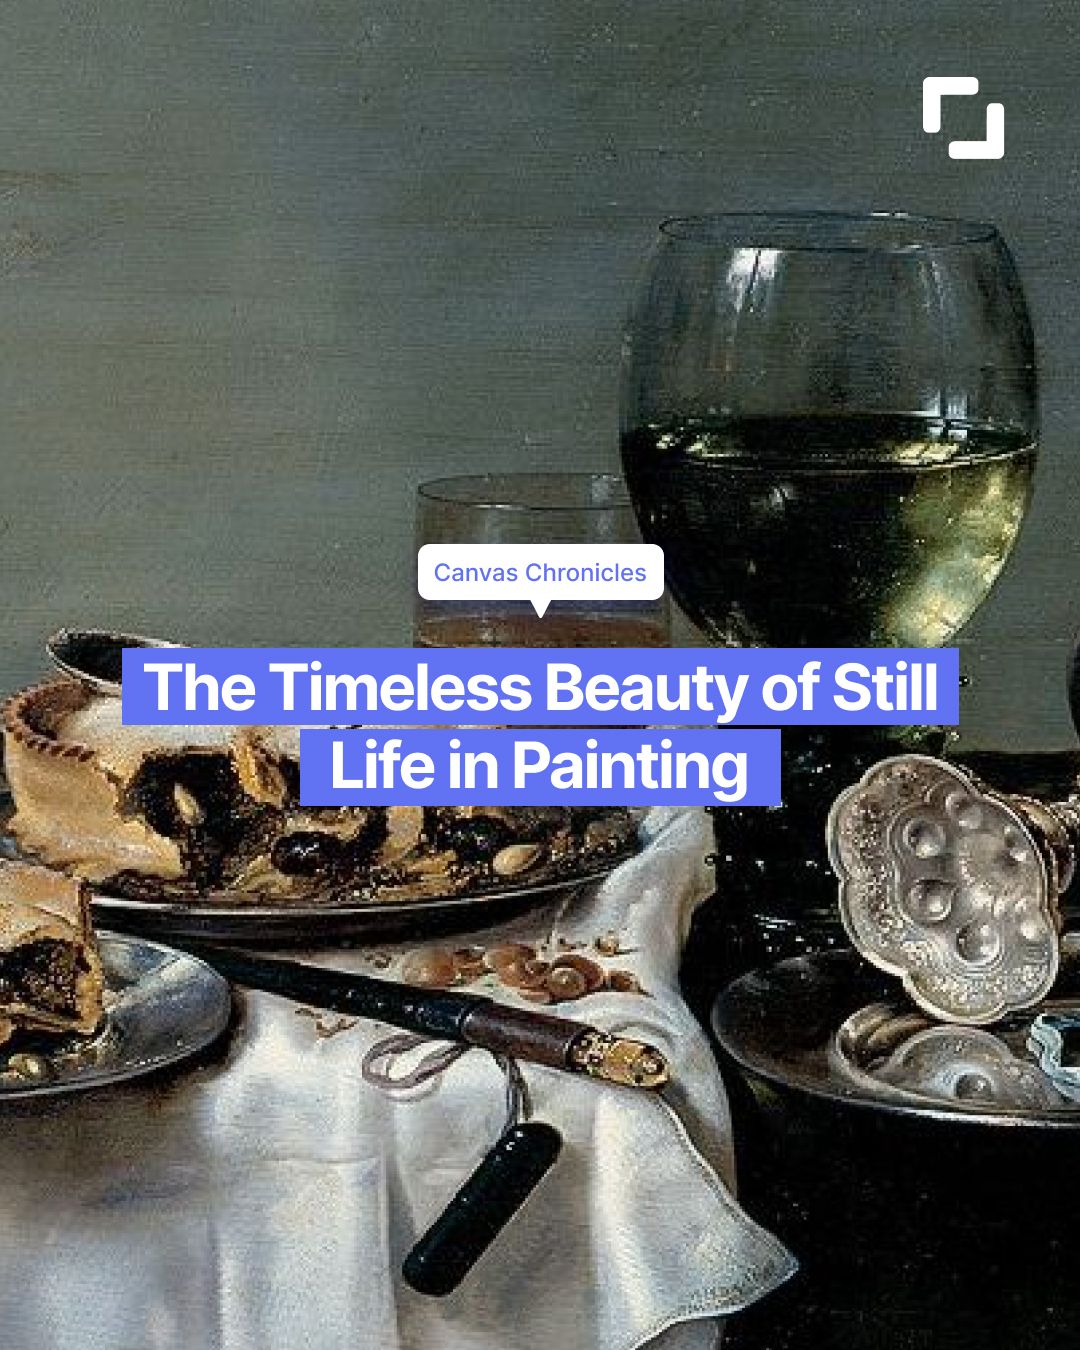 Canvas Chronicles: The Timeless Beauty of Still Life in Painting